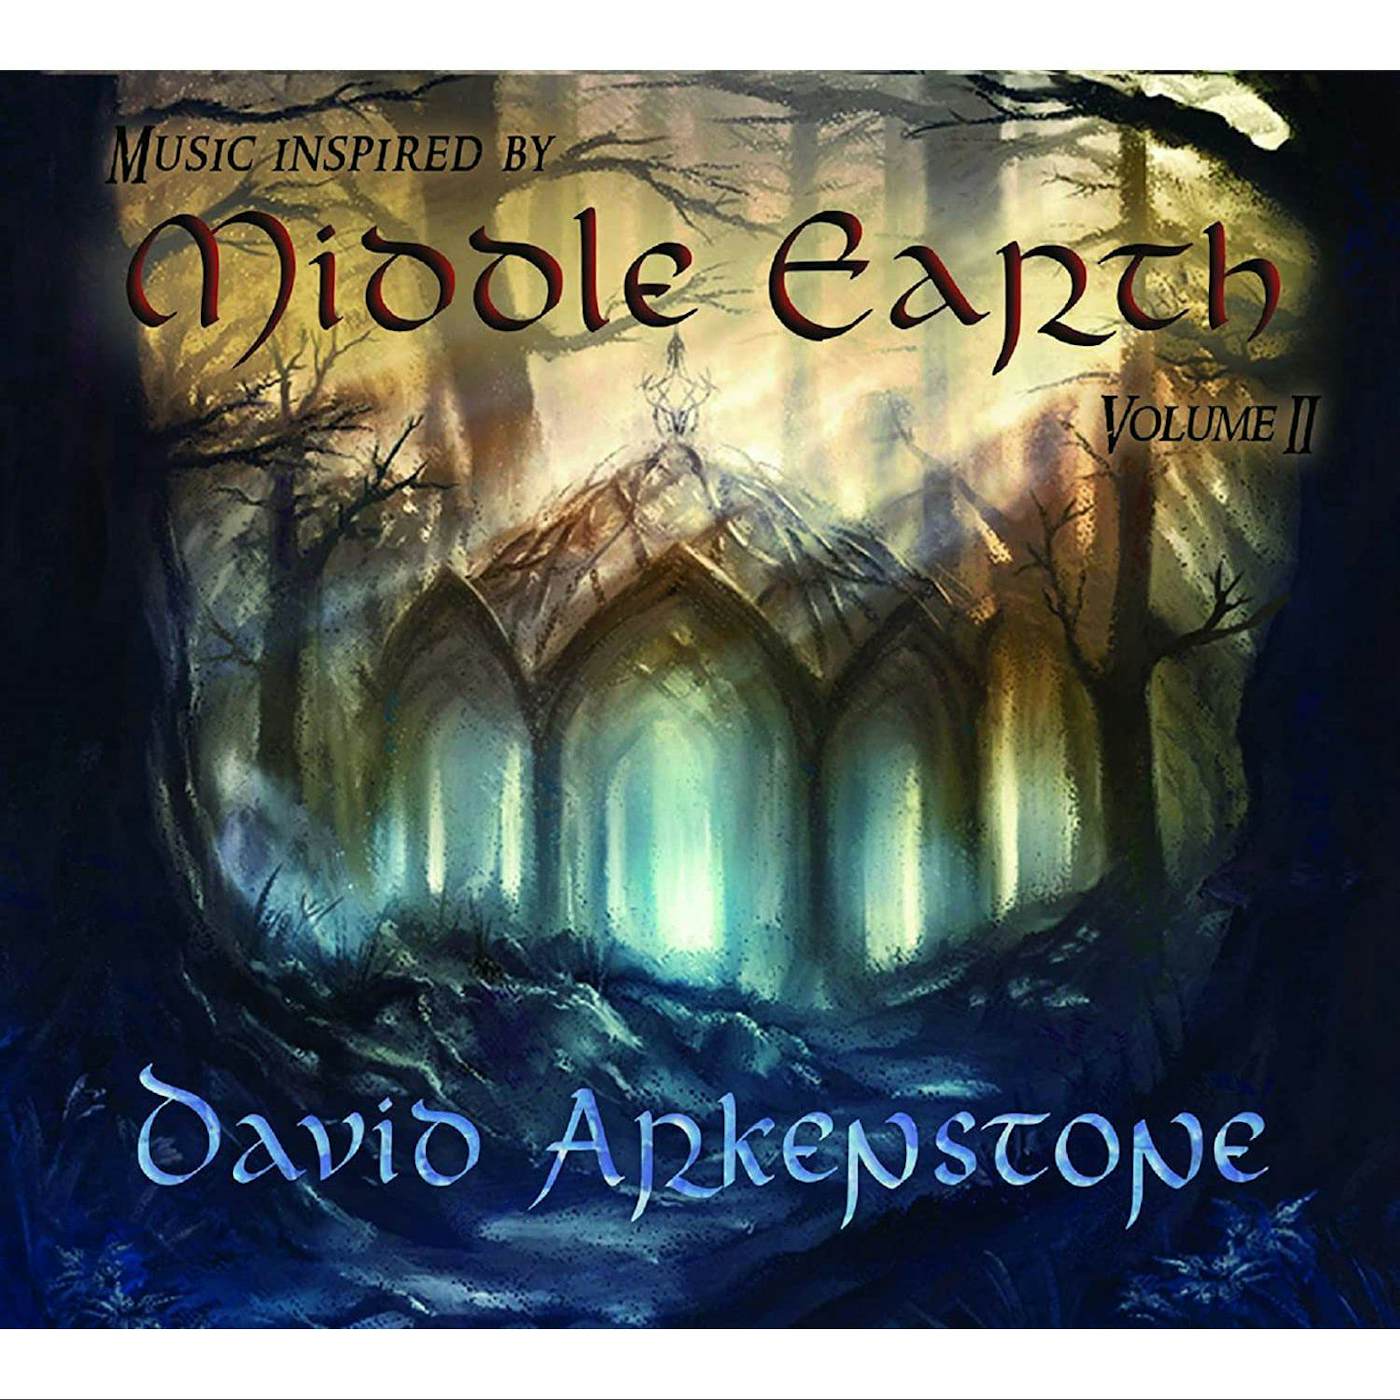 David Arkenstone Music Inspired By Middle Earth Vol. II Vinyl Record